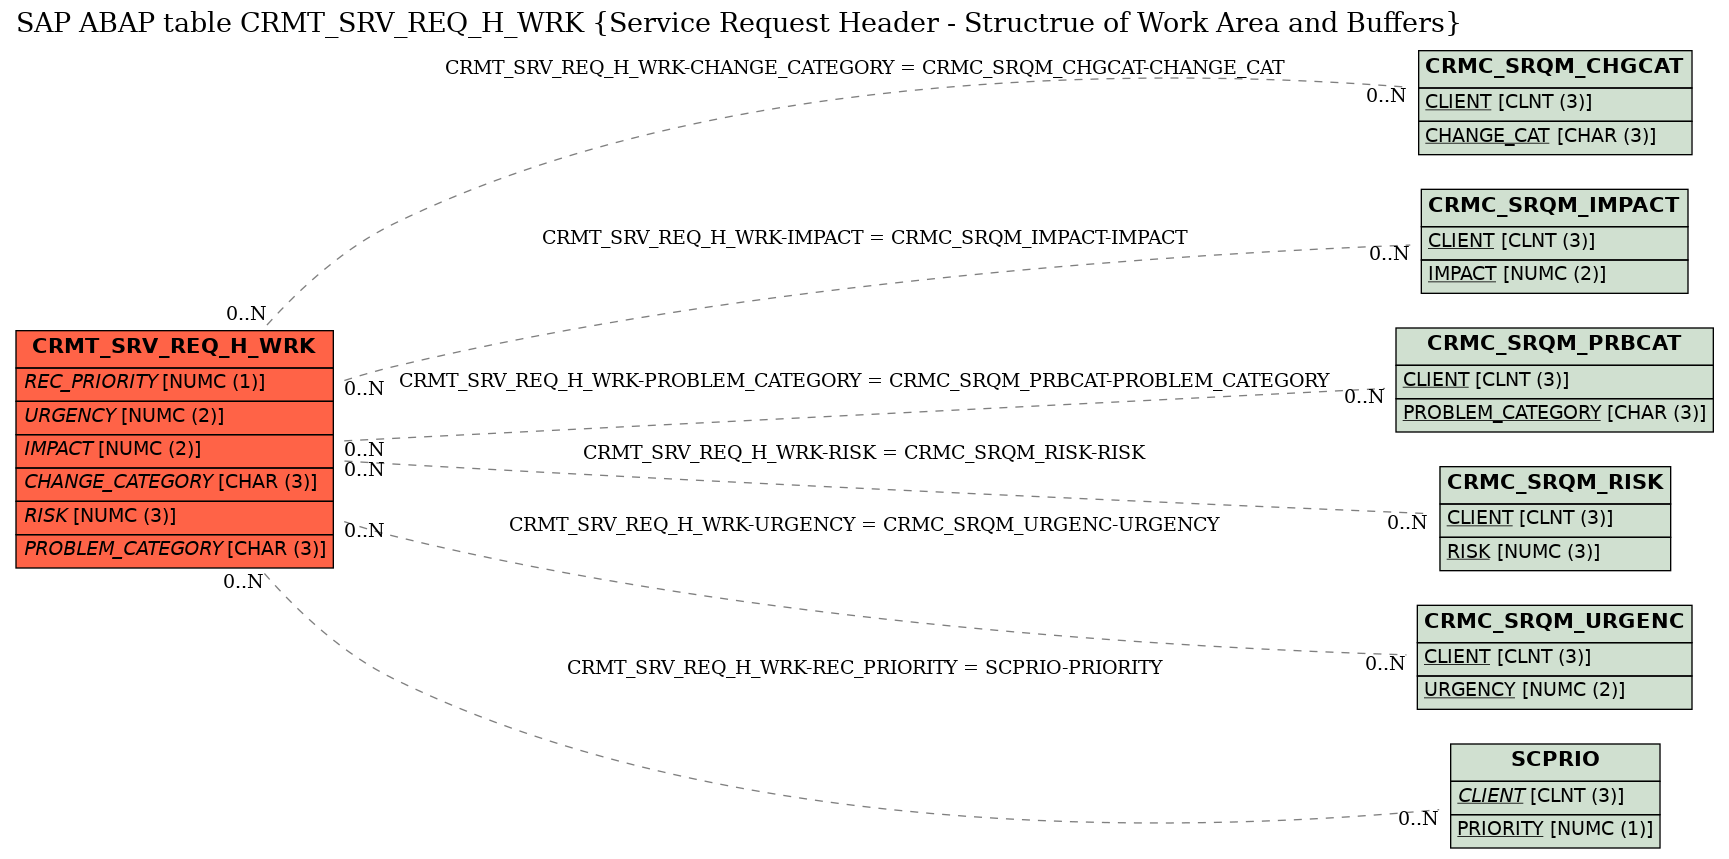 E-R Diagram for table CRMT_SRV_REQ_H_WRK (Service Request Header - Structrue of Work Area and Buffers)